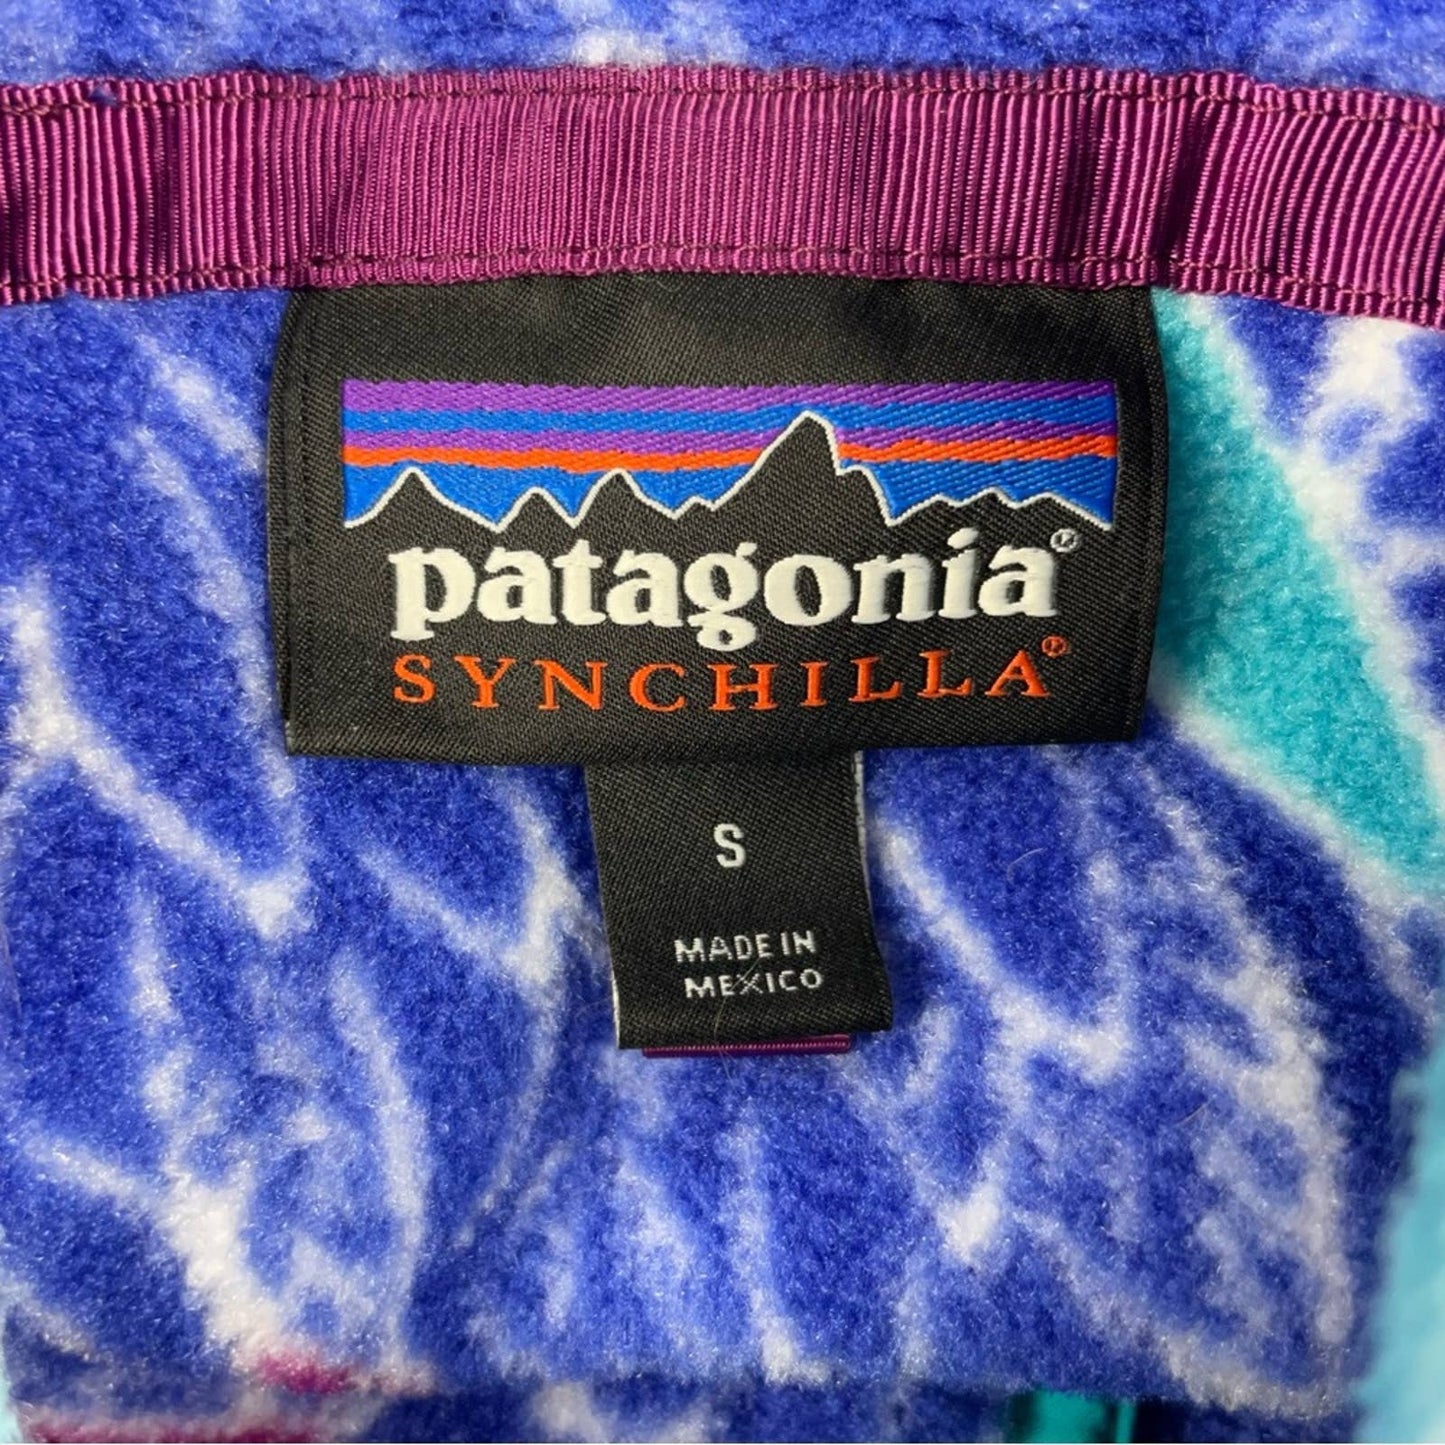 Patagonia Synchilla Moon Owl Harvest Blue Moon Pullover Snap-T Fleece Jacket Size S